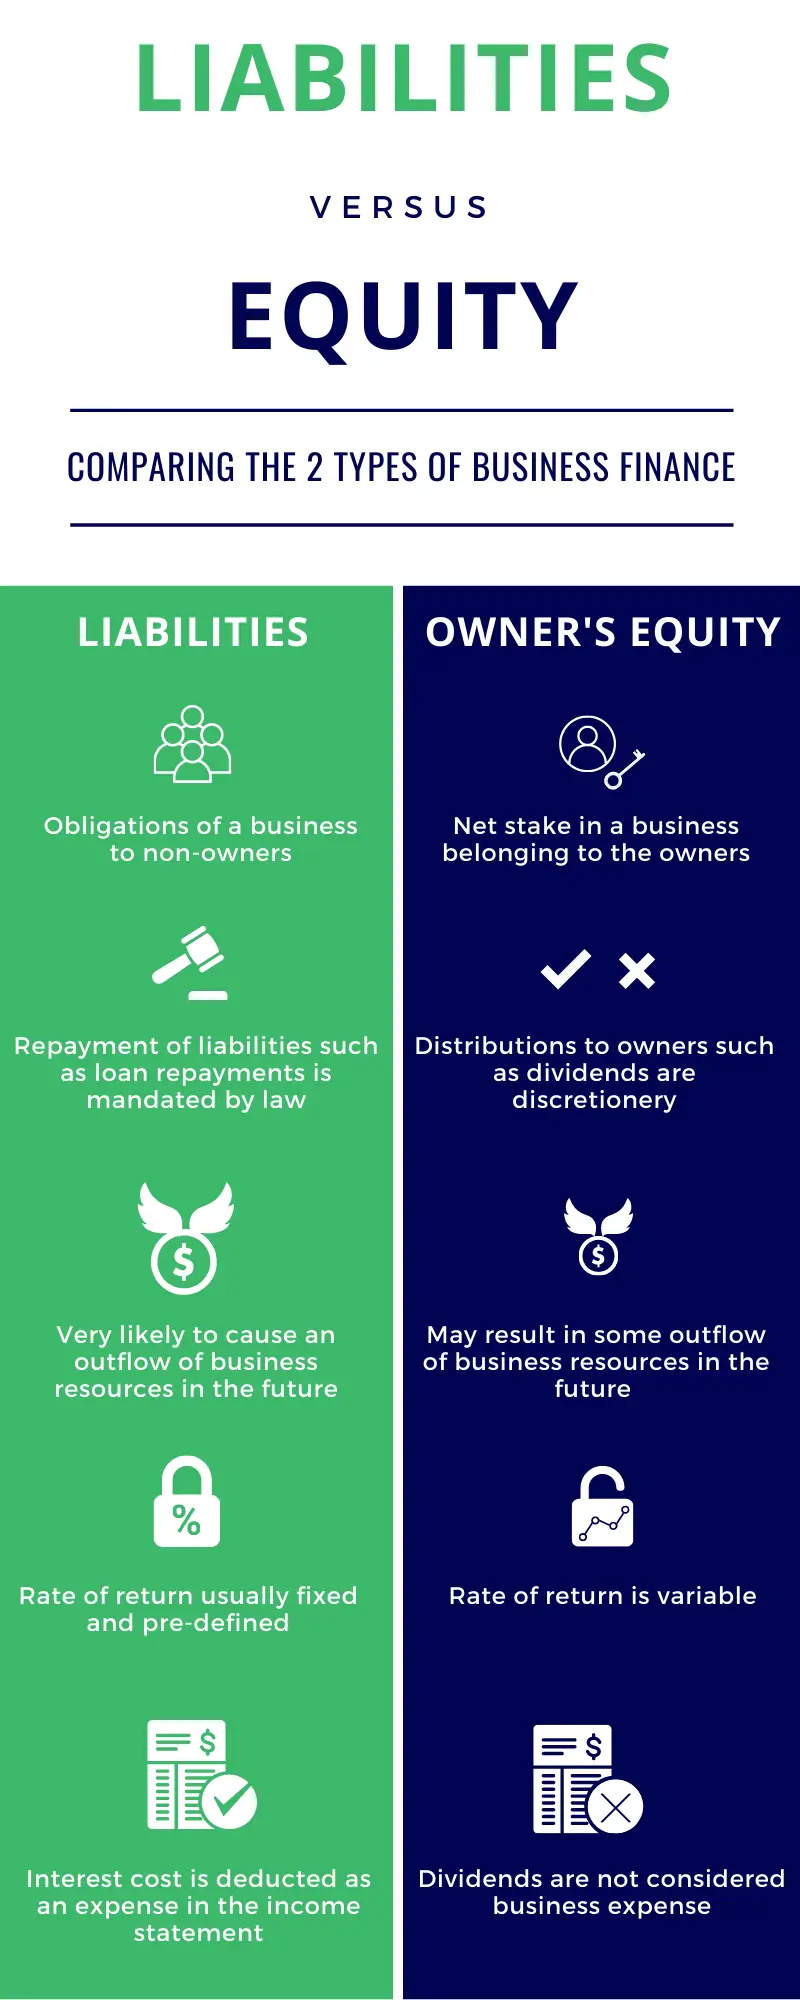 Infographic highlighting key differences between liabilities and equity